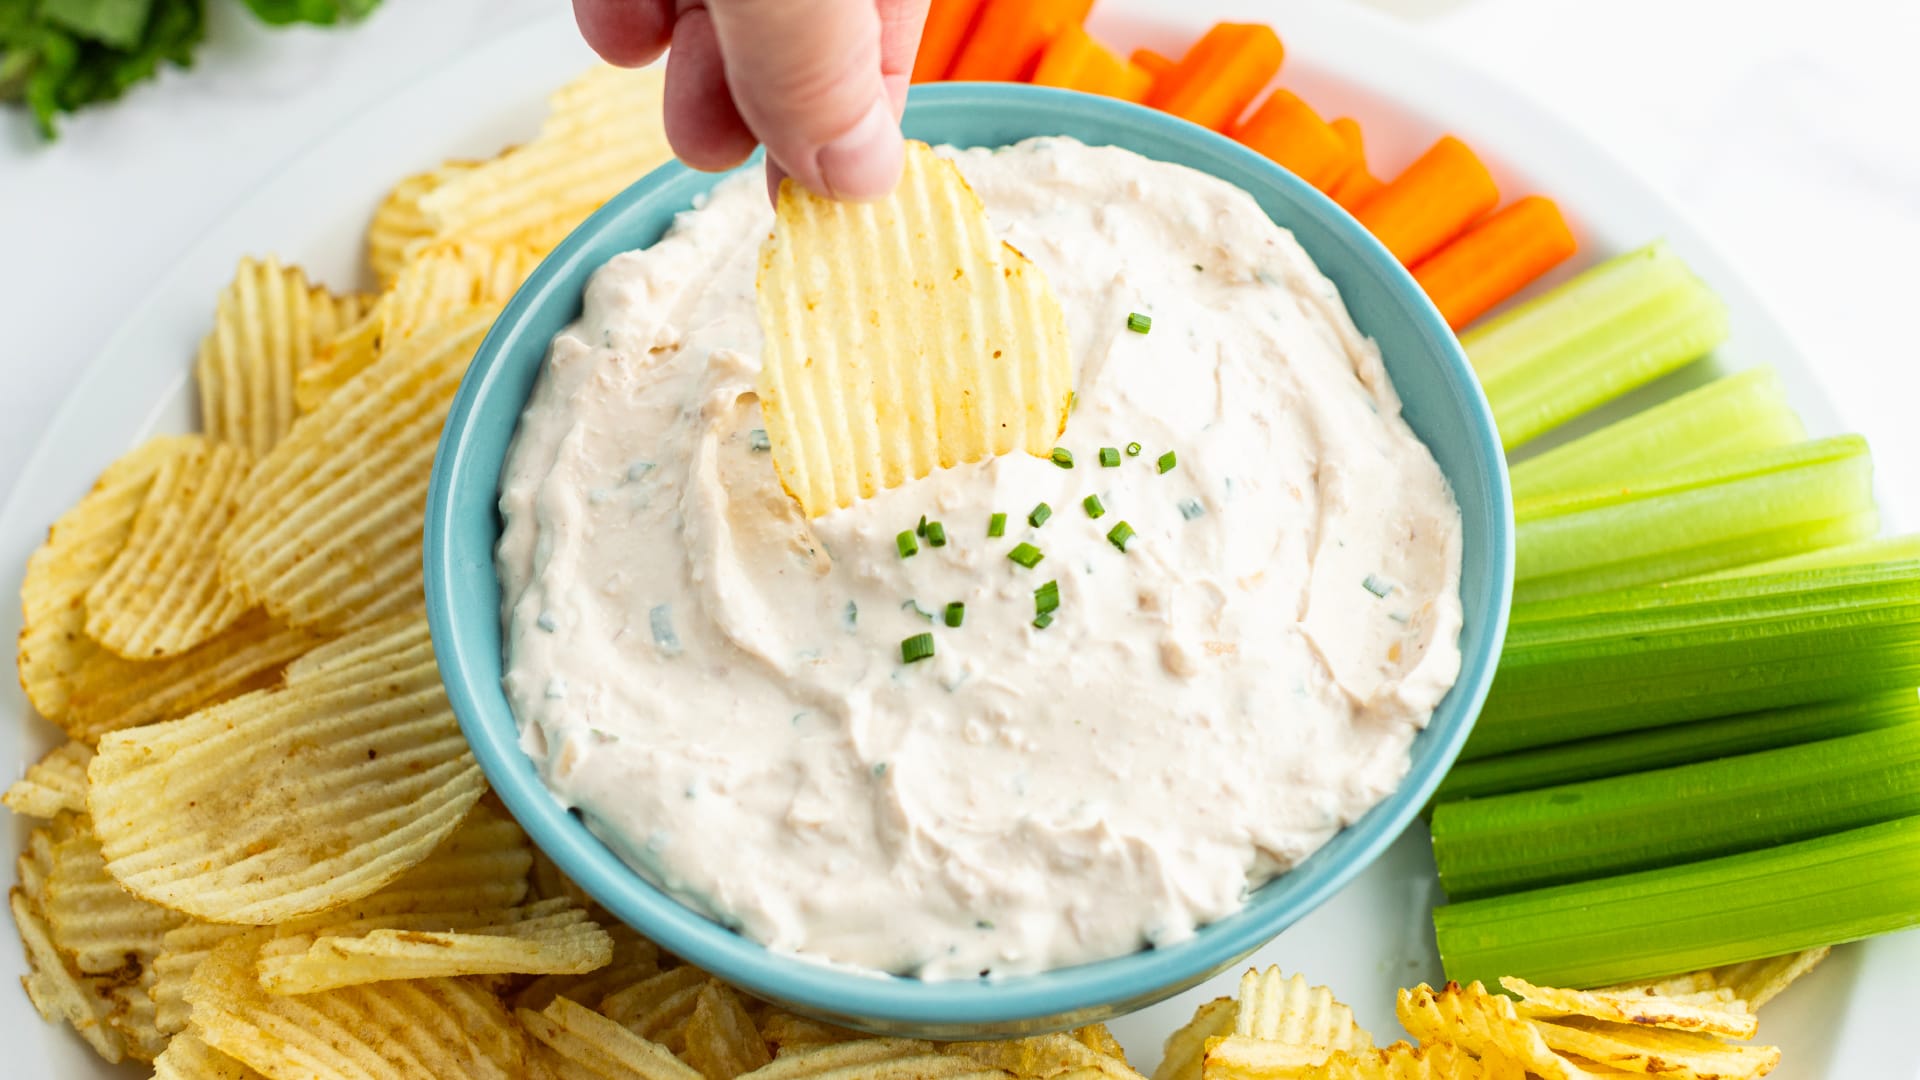 French Onion Dip {from scratch in 5 minutes!} - Belly Full